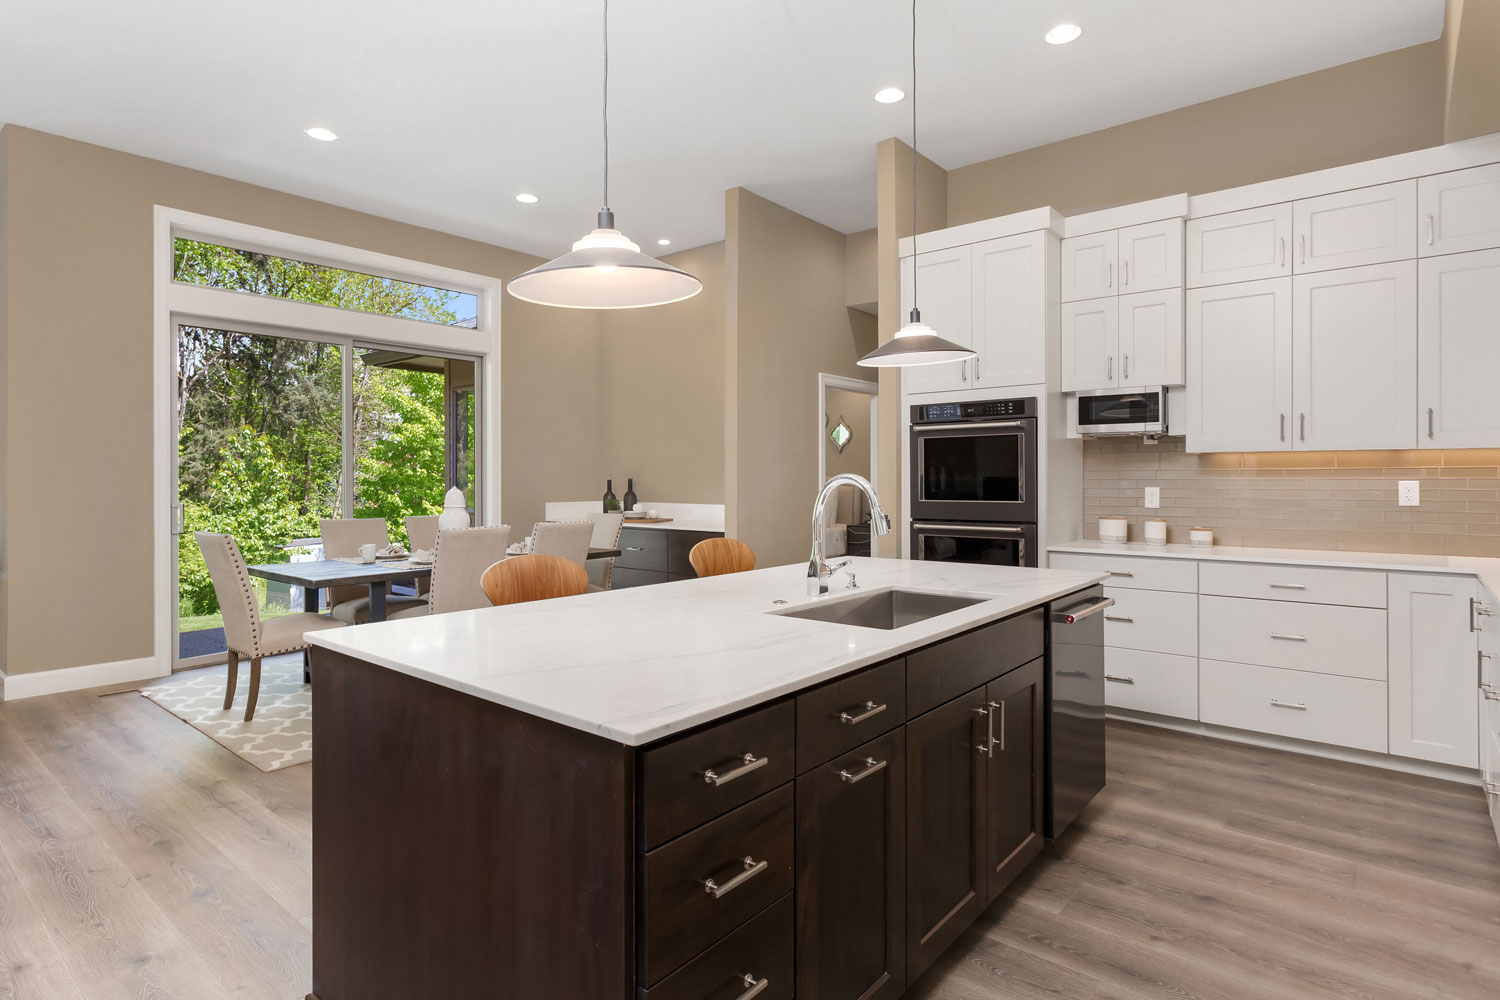 Dark oak kitchen cabinets matched with white countertops and dangling lamps